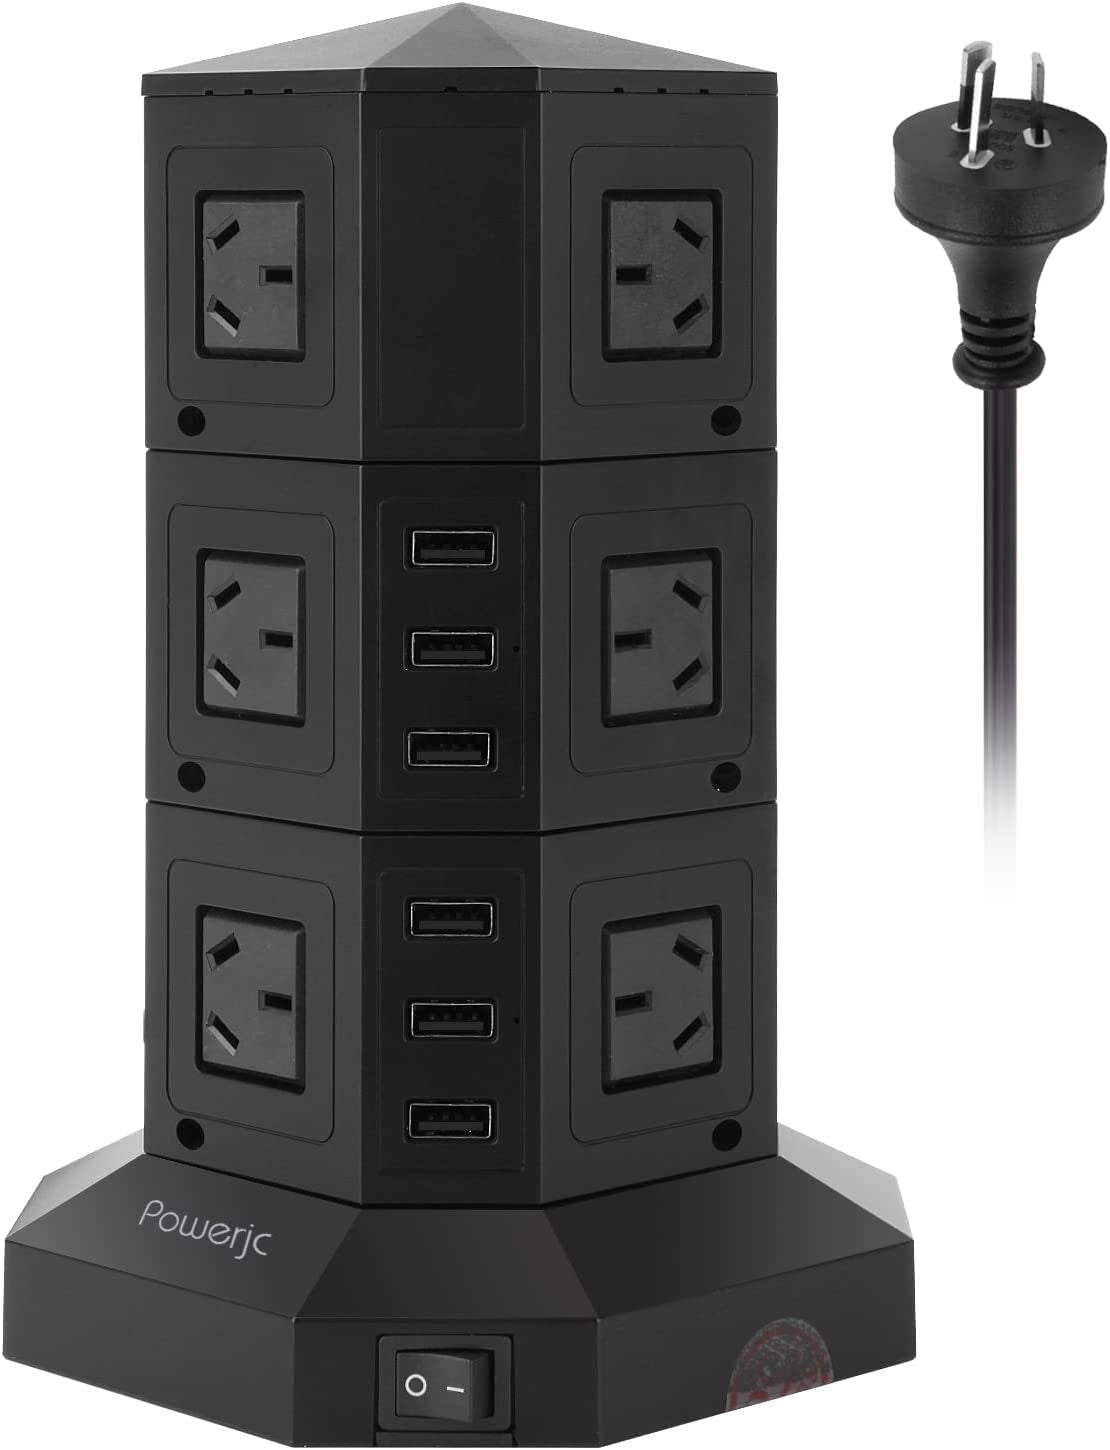 Powerjc, Tower Power Strip USB Surge Protector Socket 12 AC Outlets with 6 USB Ports Chargers Black-Powerjc